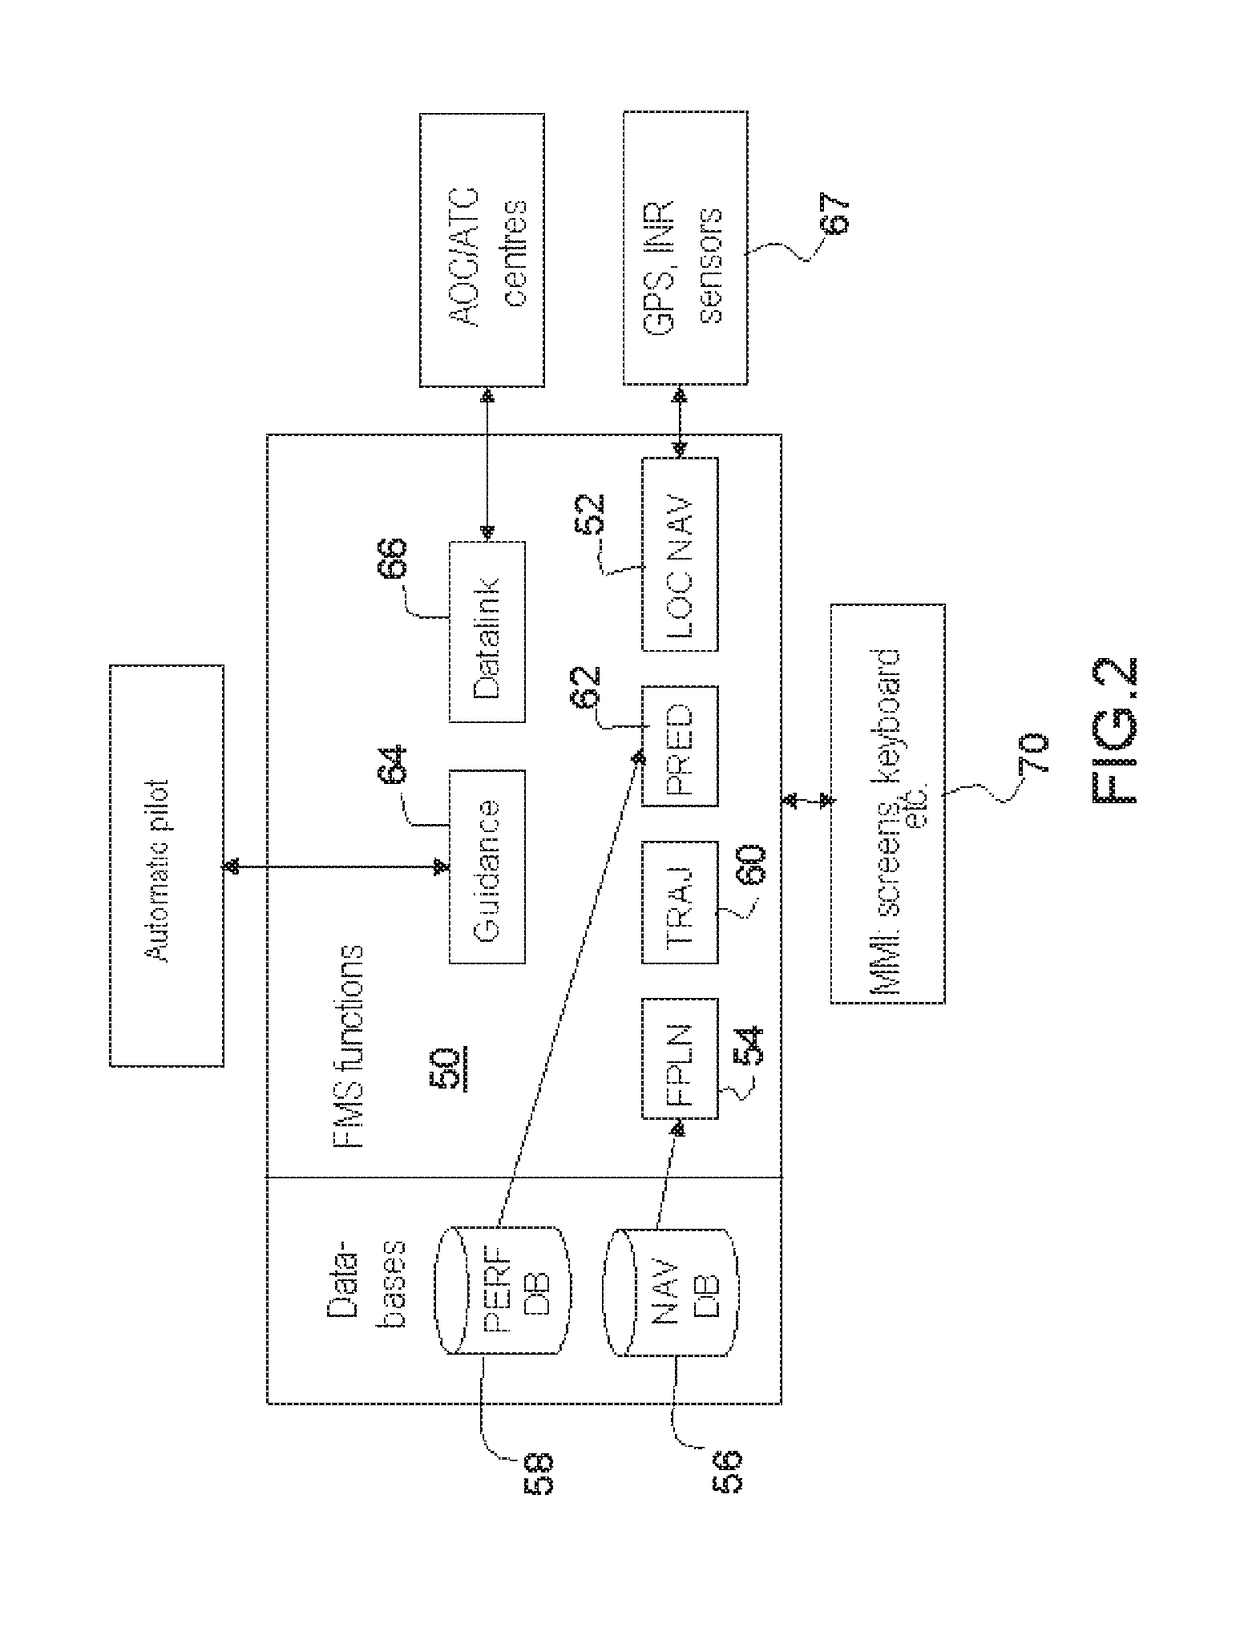 Method for integrating a new service into an avionics onboard system with open architecture of client-server type, in particular for an FIM manoeuvre service